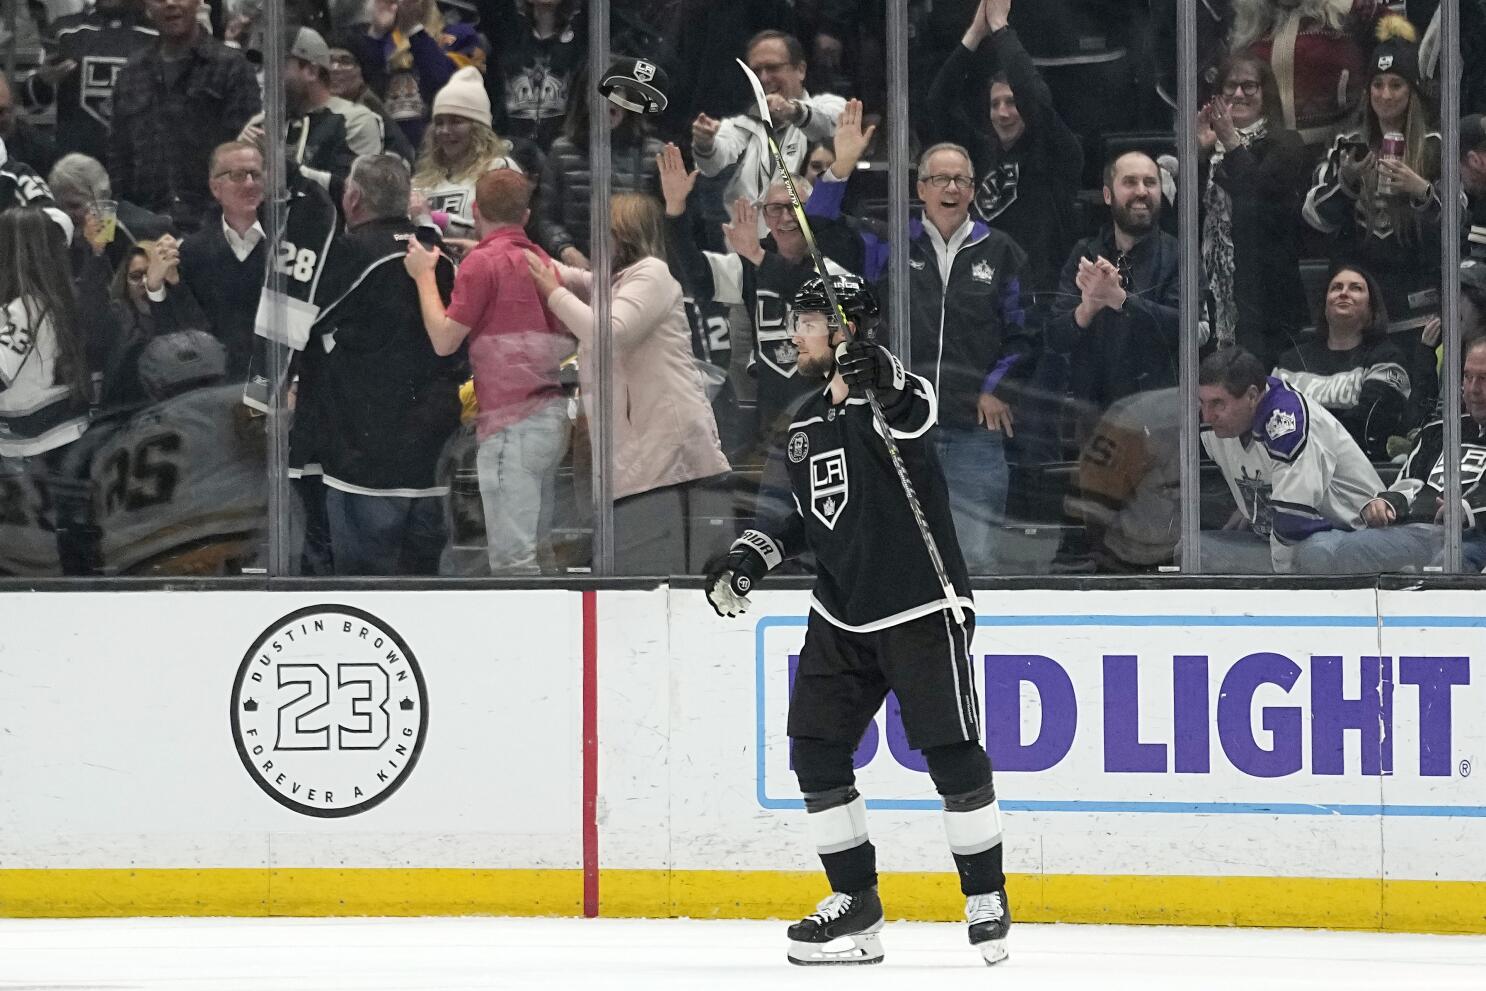 Kings fans when he retires do you want his jersey retired : r/kings